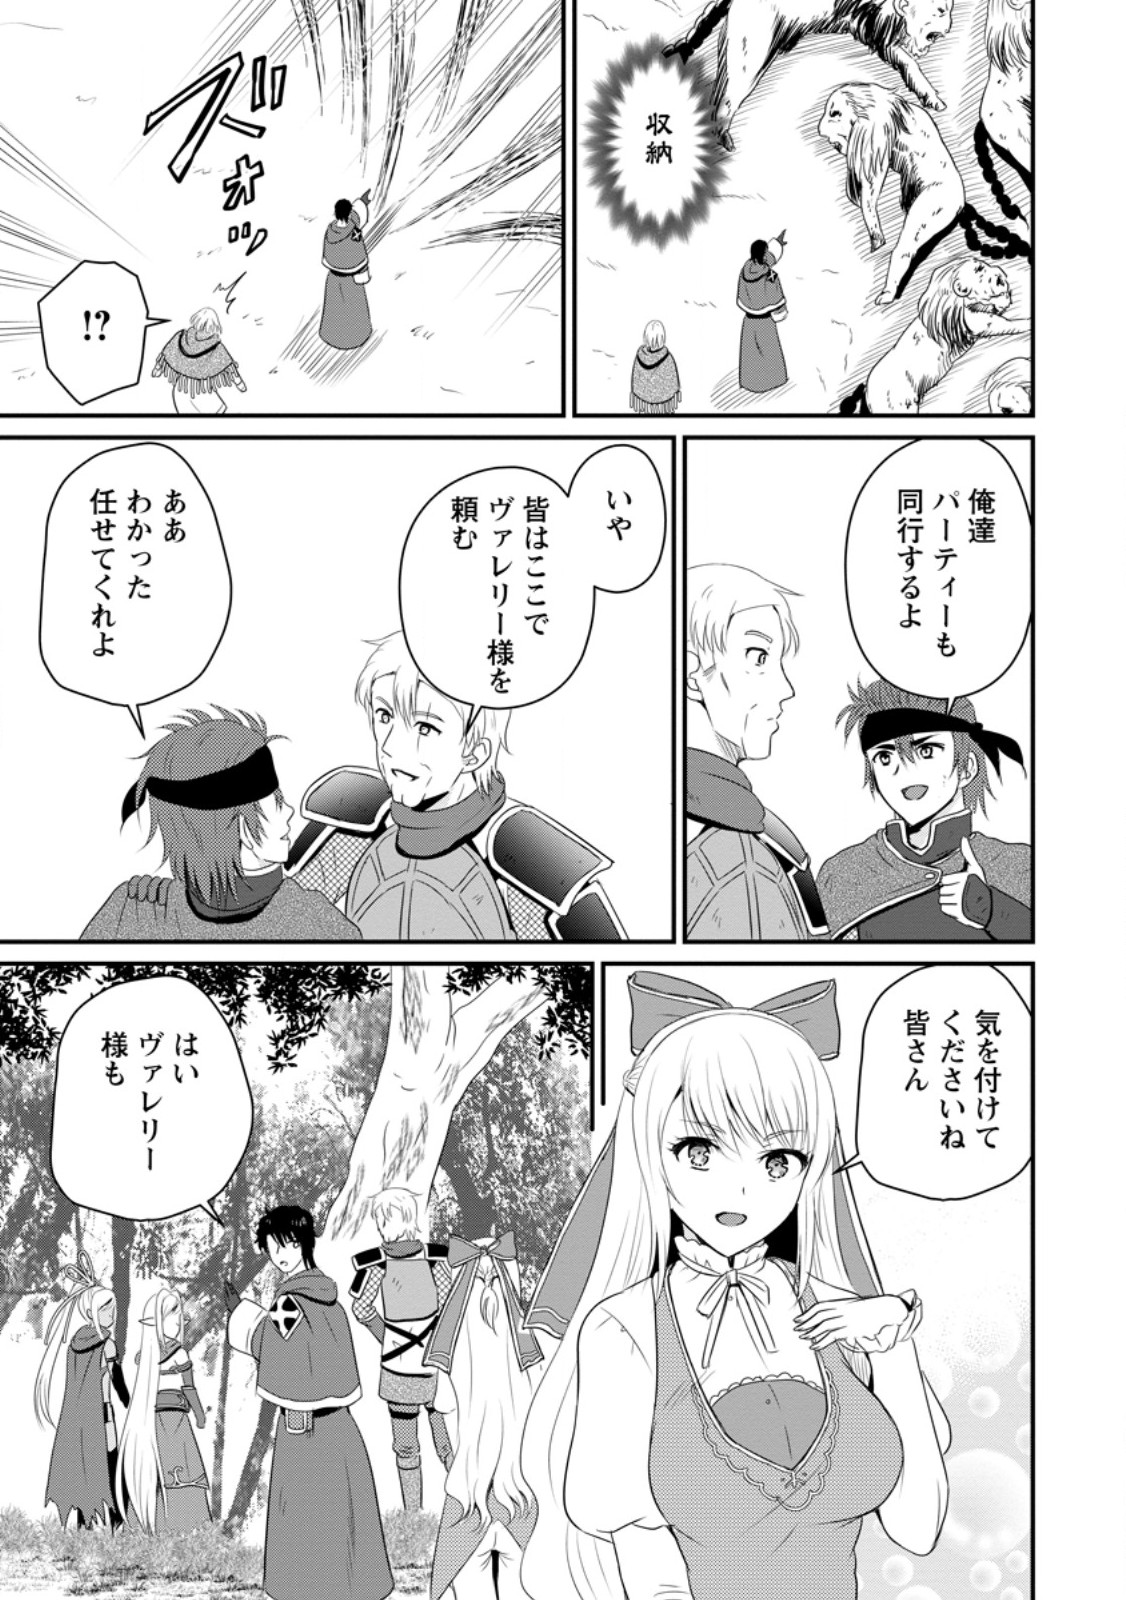 The Frontier Life of The Low-Class Ossan Healer And The Lovery Girl - Chapter 48.3 - Page 1